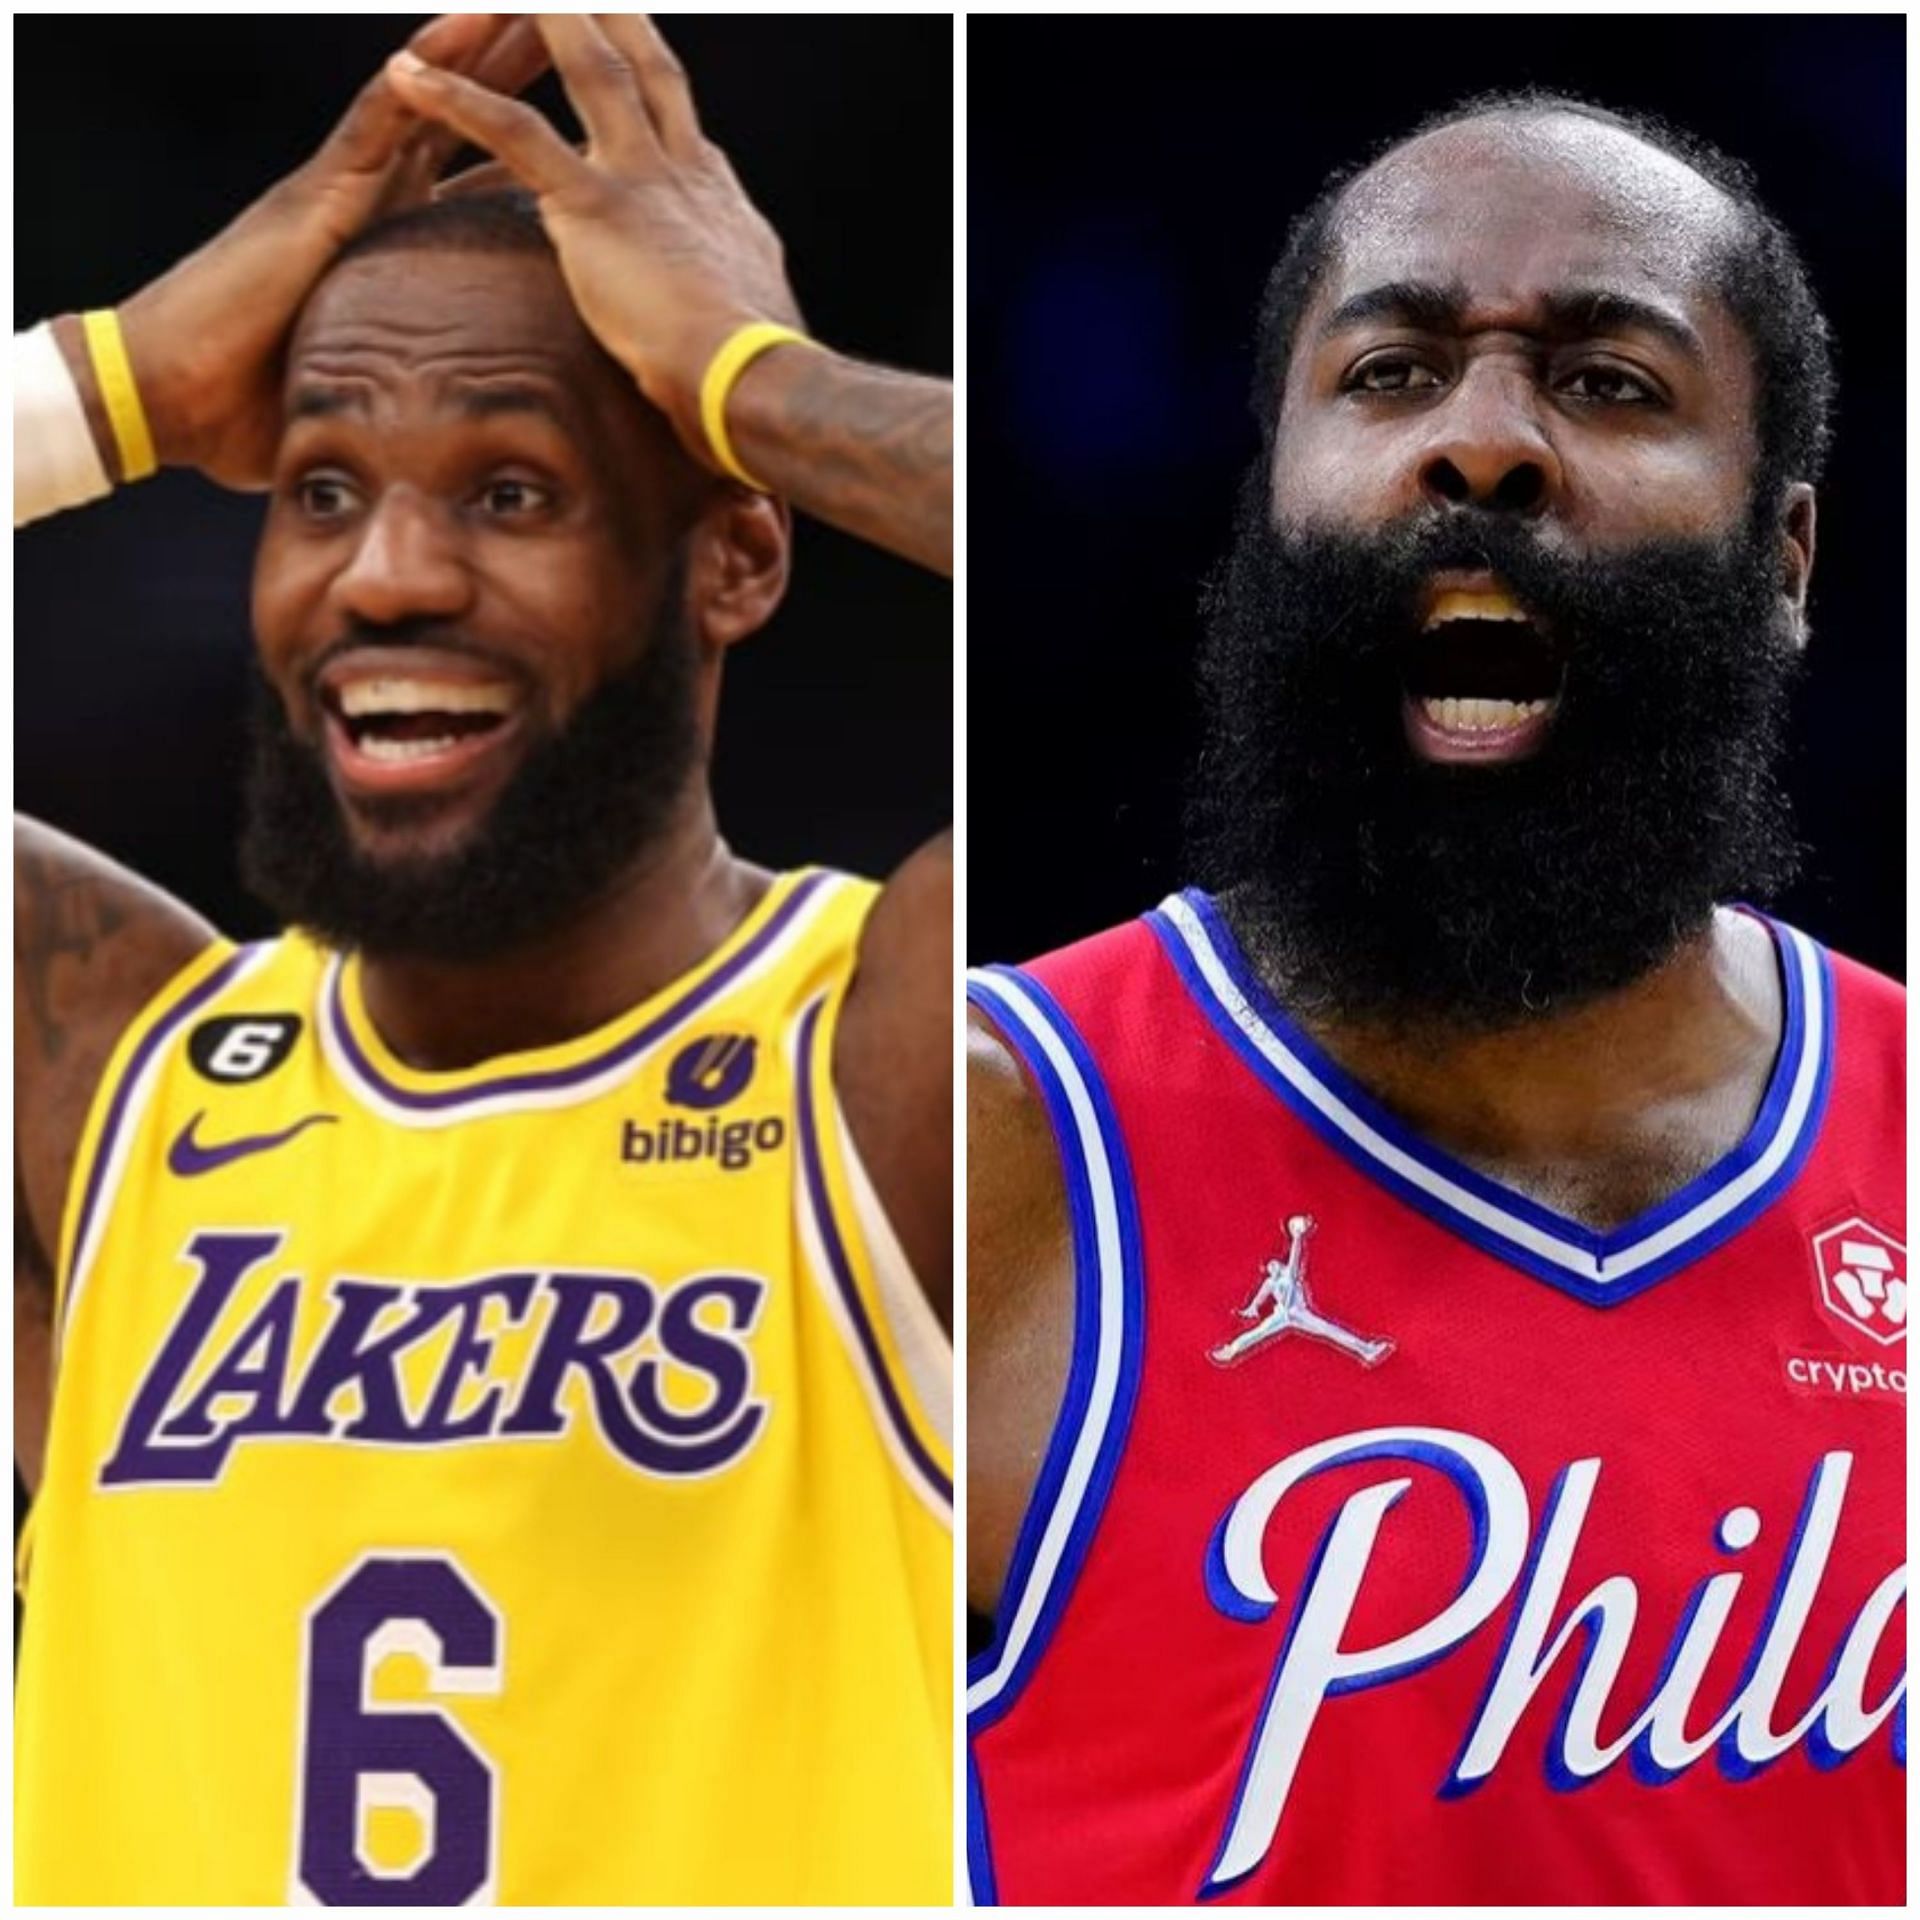 Before turning to James Harden, Sixers owner Josh Harris wanted to pair LeBron James with $213 million star Joel Embiid